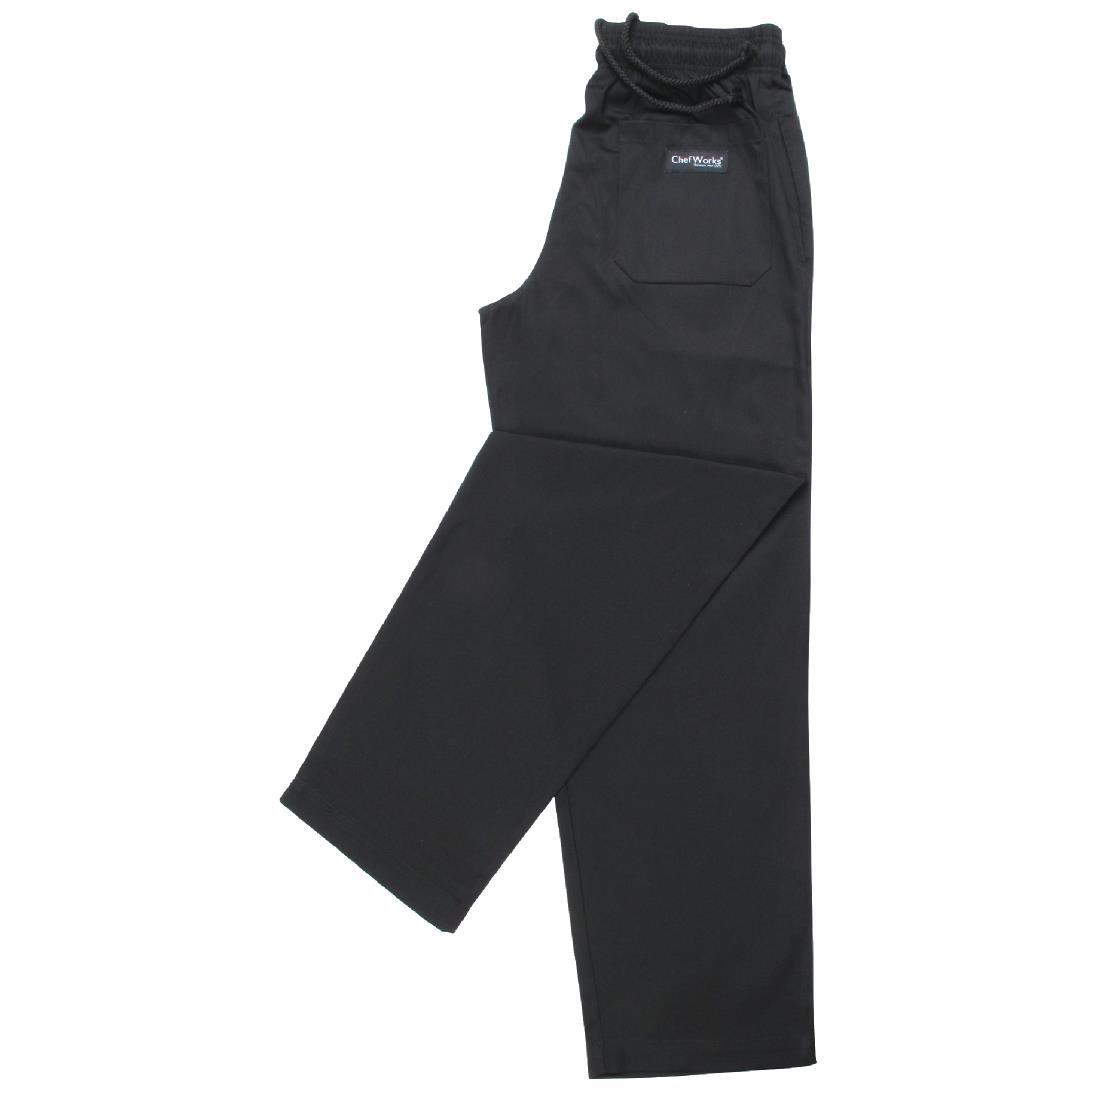 Chef Works Essential Baggy Trousers Black 7XL - A029-7XL  - 2